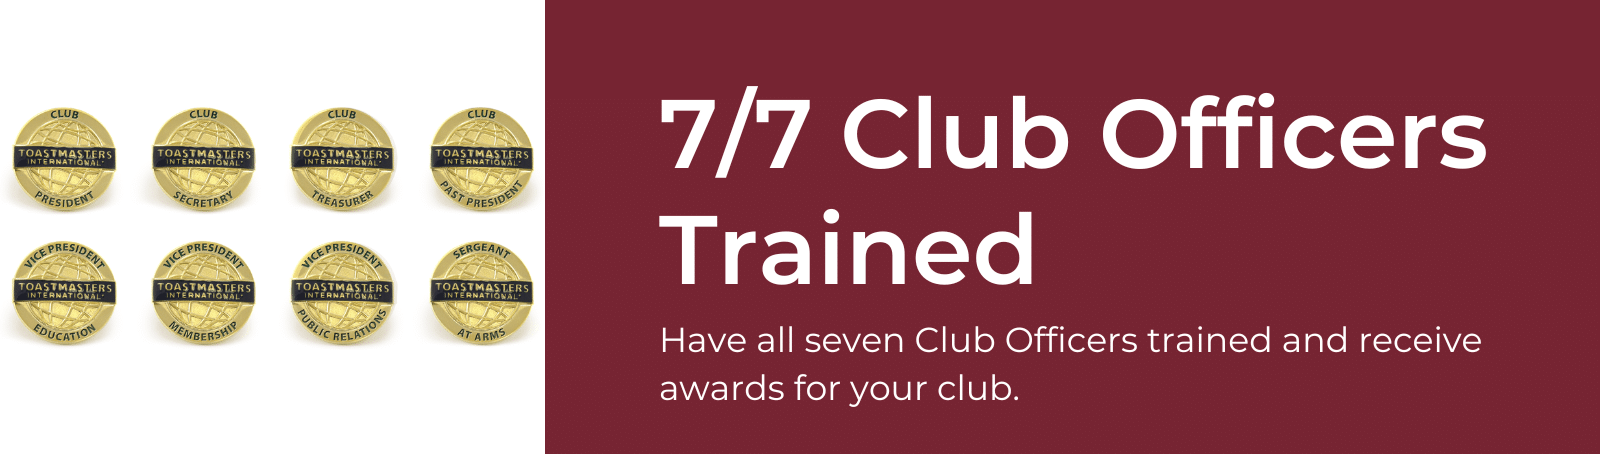 Pheonix award - Have all seven club officers trained and receive exciting awards for your committee.